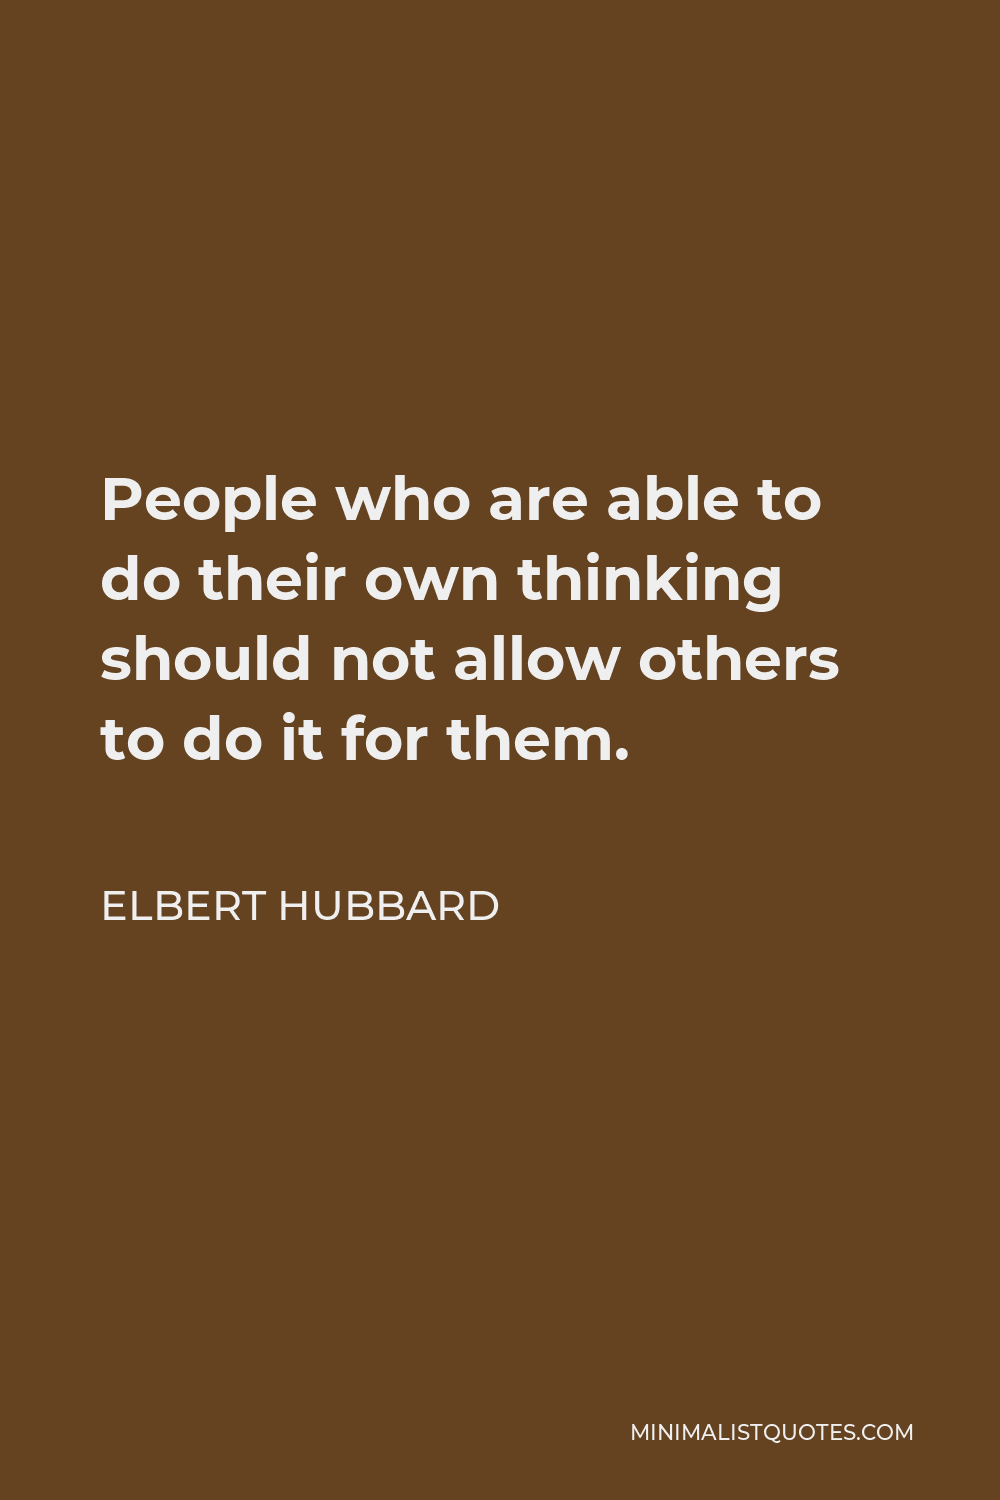 Elbert Hubbard Quote - People who are able to do their own thinking should not allow others to do it for them.